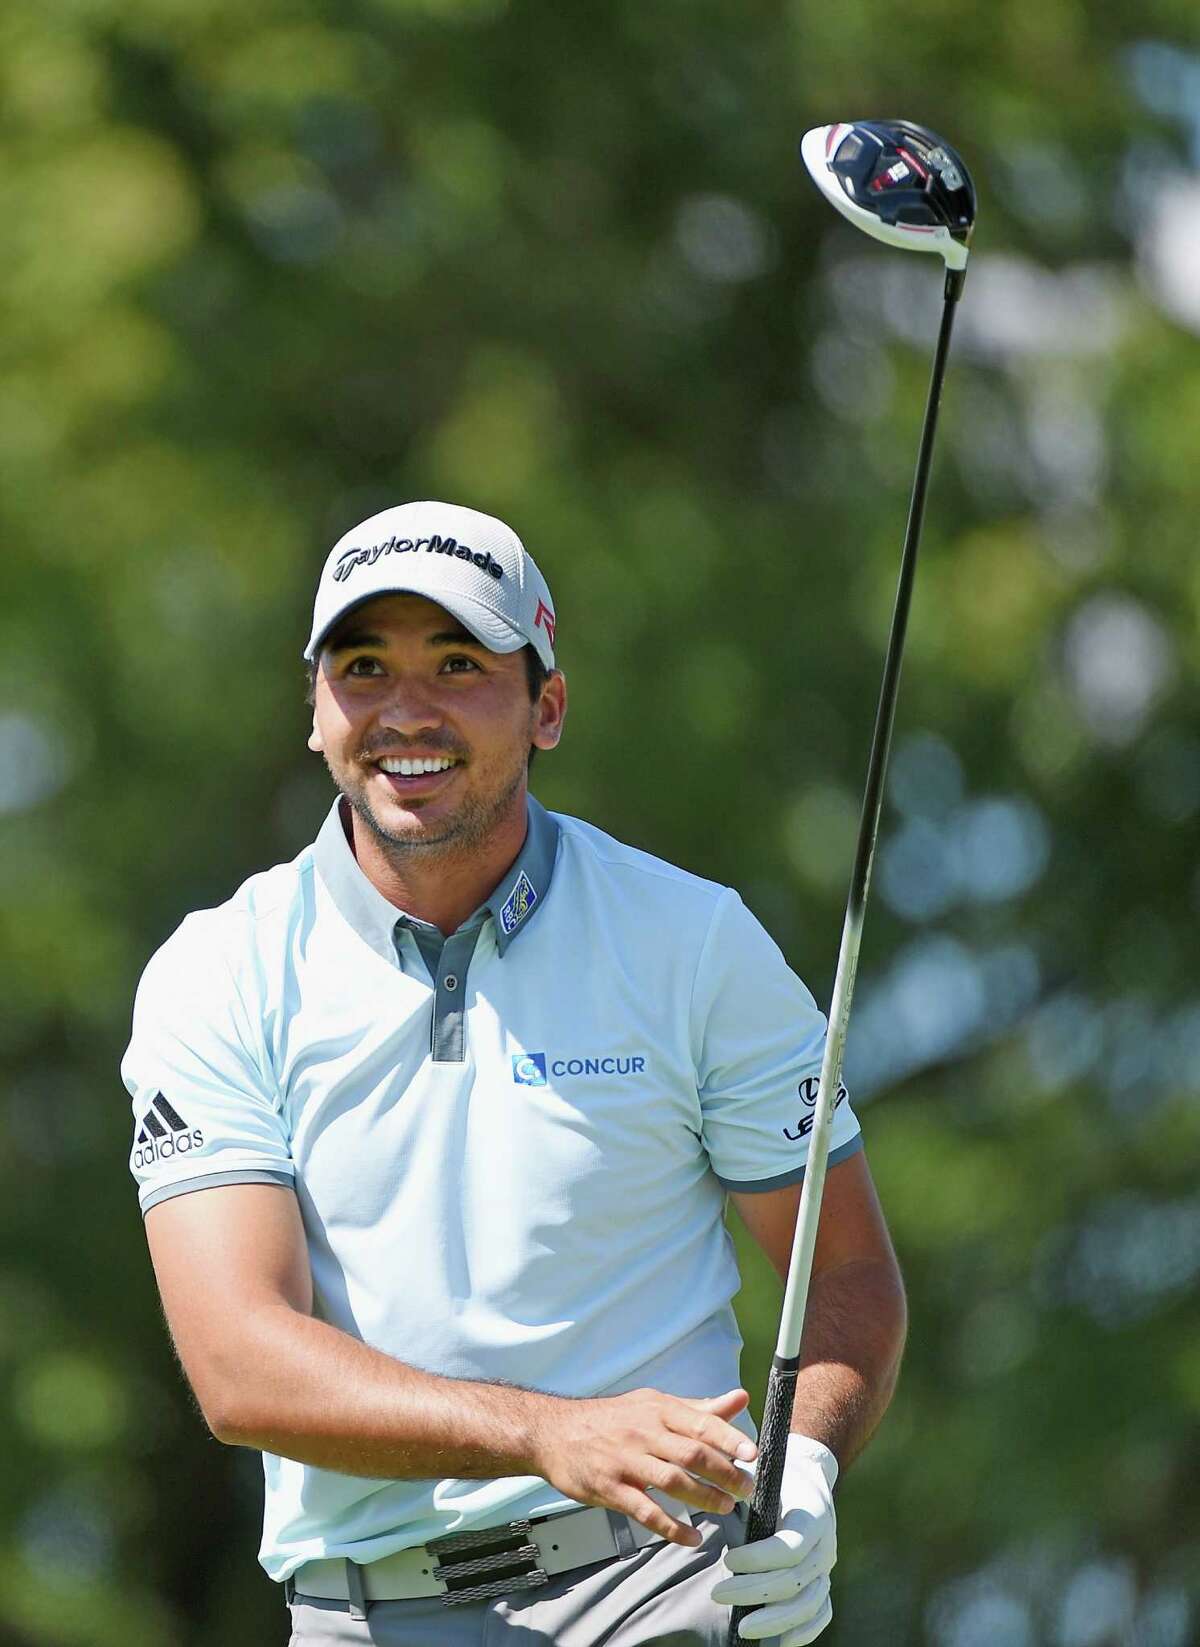 EDISON, NJ - AUGUST 28: Jason Day of Australia watches his tee shot on the seventh hole during the second round of The Barclays at Plainfield Country Club on August 28, 2015 in Edison, New Jersey. (Photo by Ross Kinnaird/Getty Images)